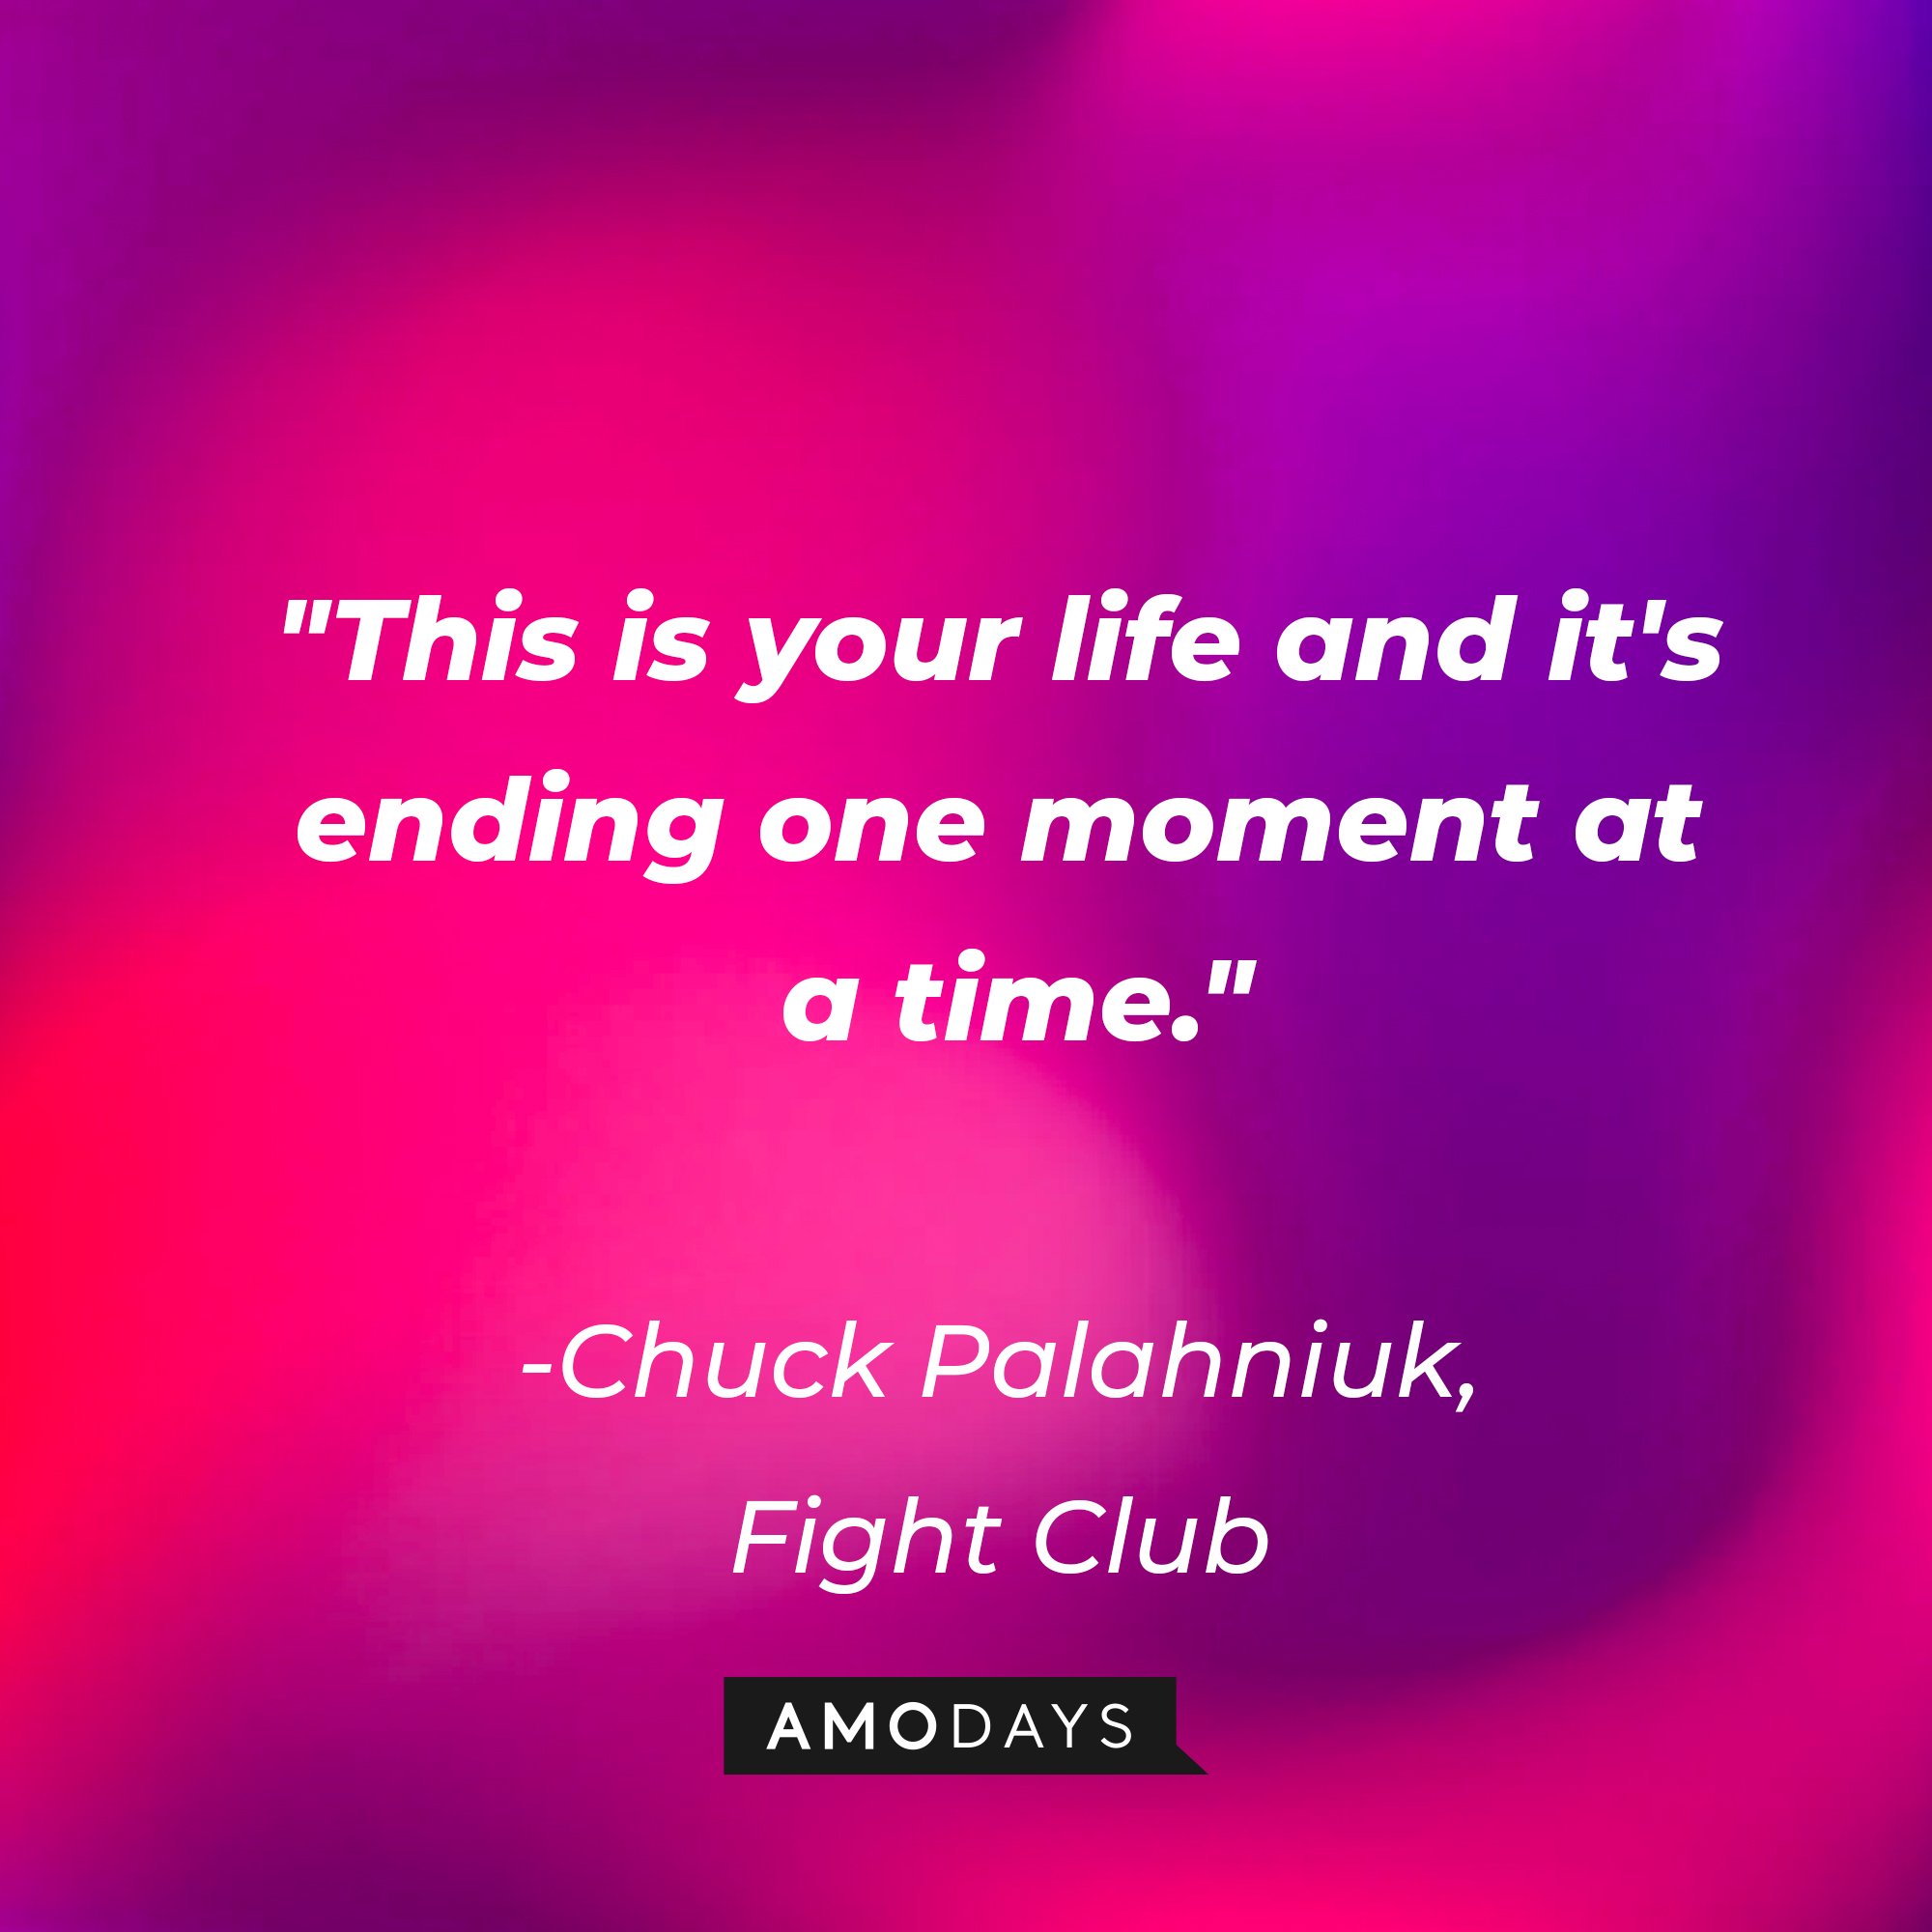 Chuck Palahniuk's quote: "This is your life, and it's ending one moment at a time." | Image: Amodays